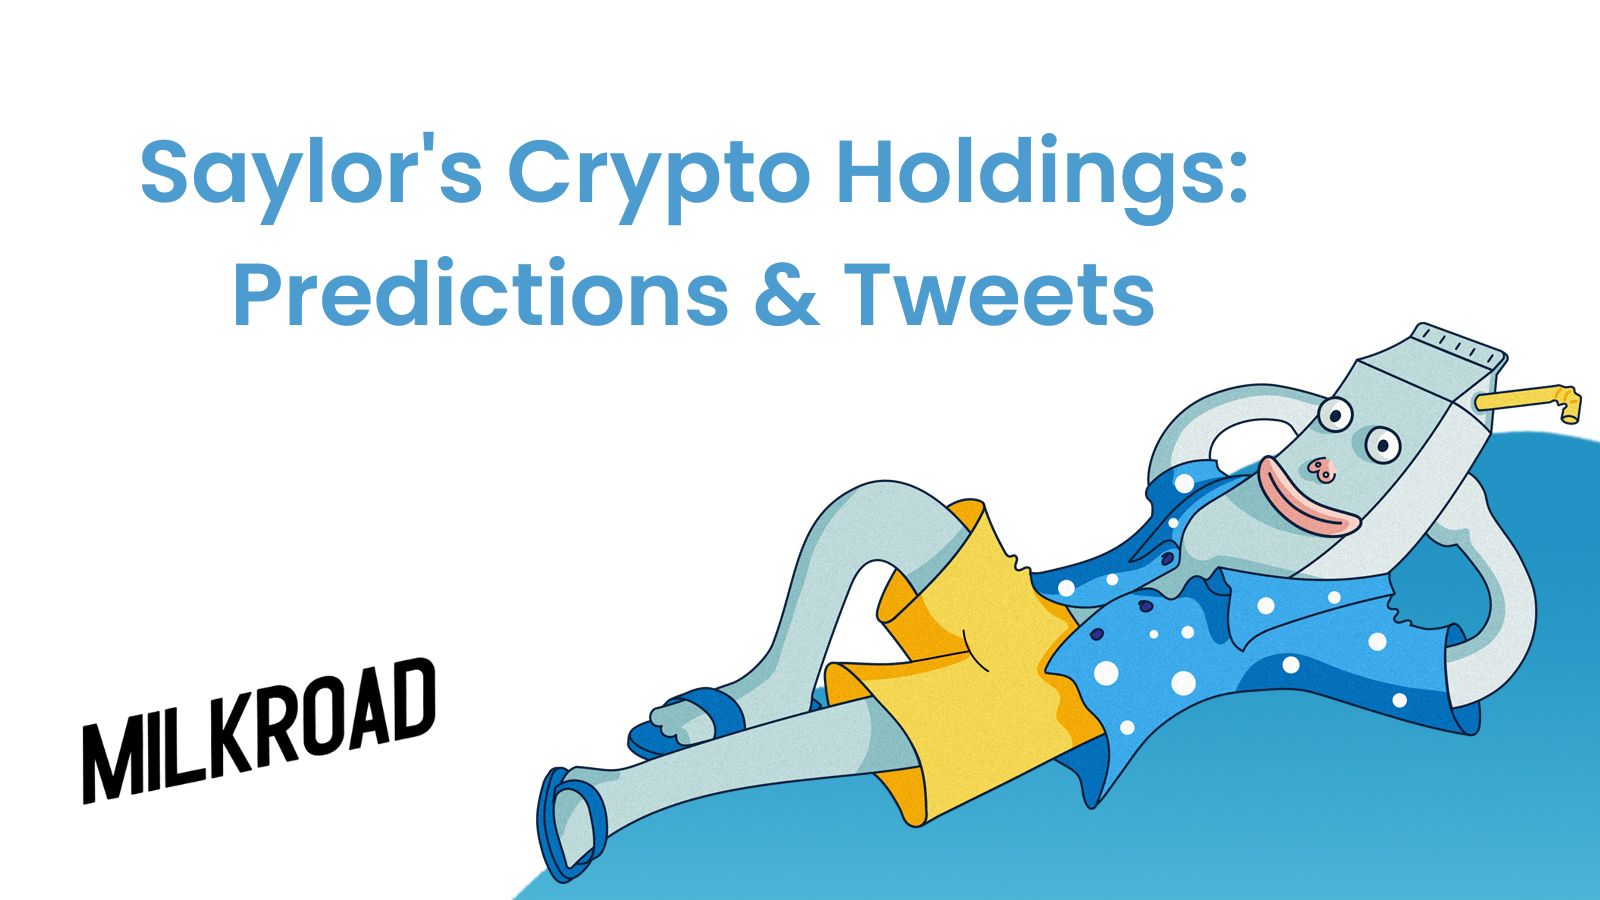 Saylor's Crypto Holdings Predictions & Tweets